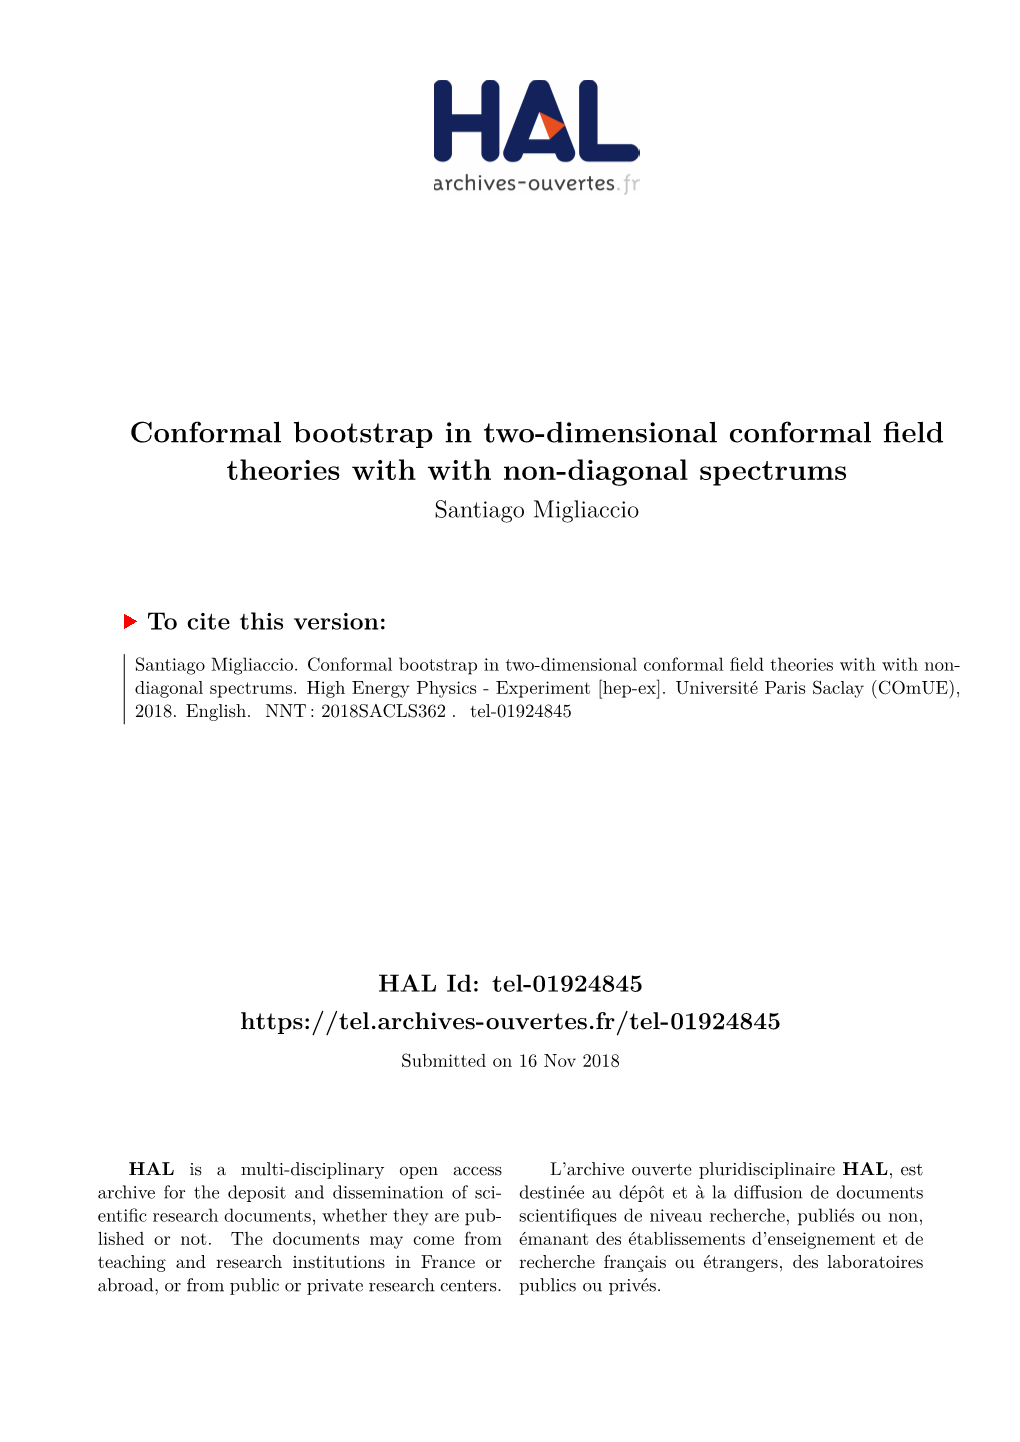 Conformal Bootstrap in Two-Dimensional Conformal Field Theories with with Non-Diagonal Spectrums Santiago Migliaccio